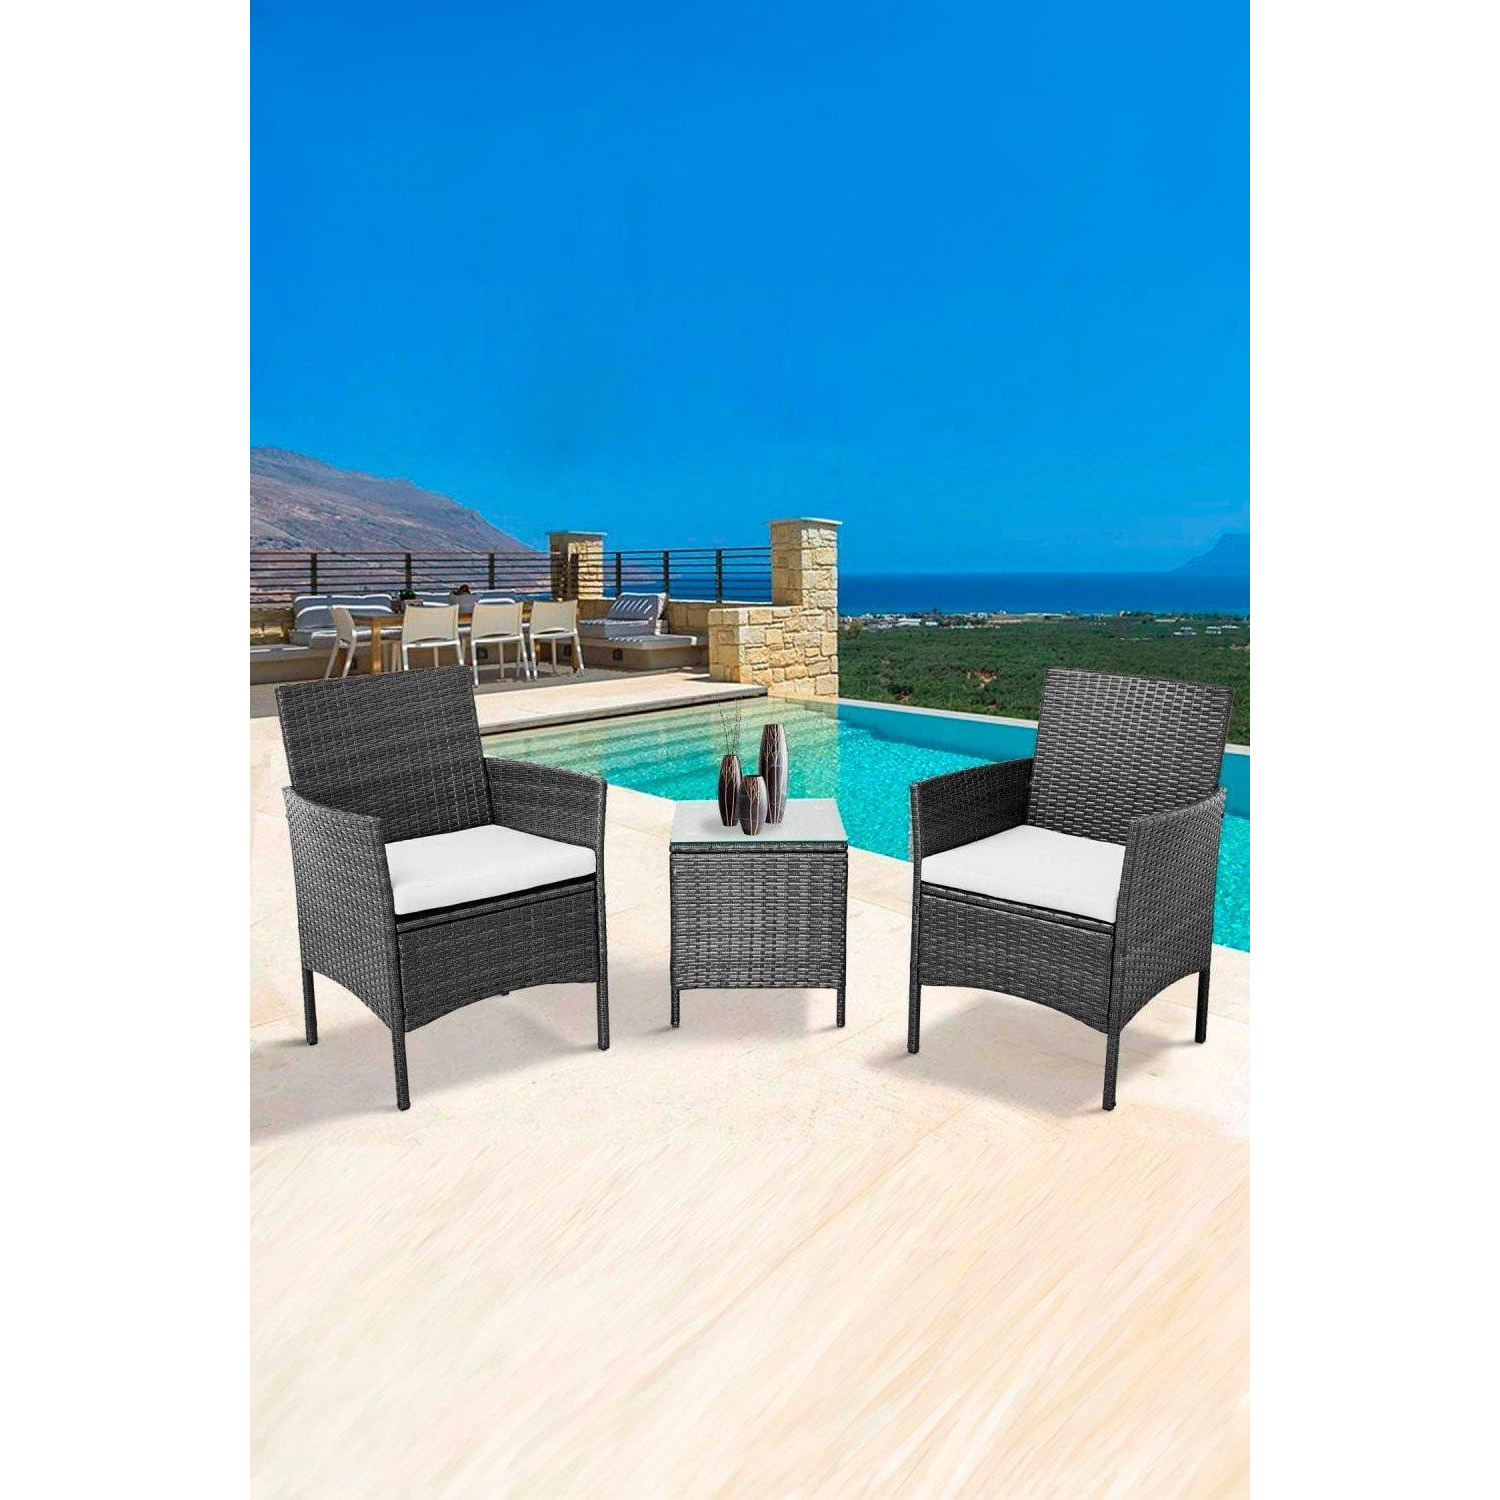 3 Piece Rattan Table and Chairs Garden Furniture Bistro Set - image 1